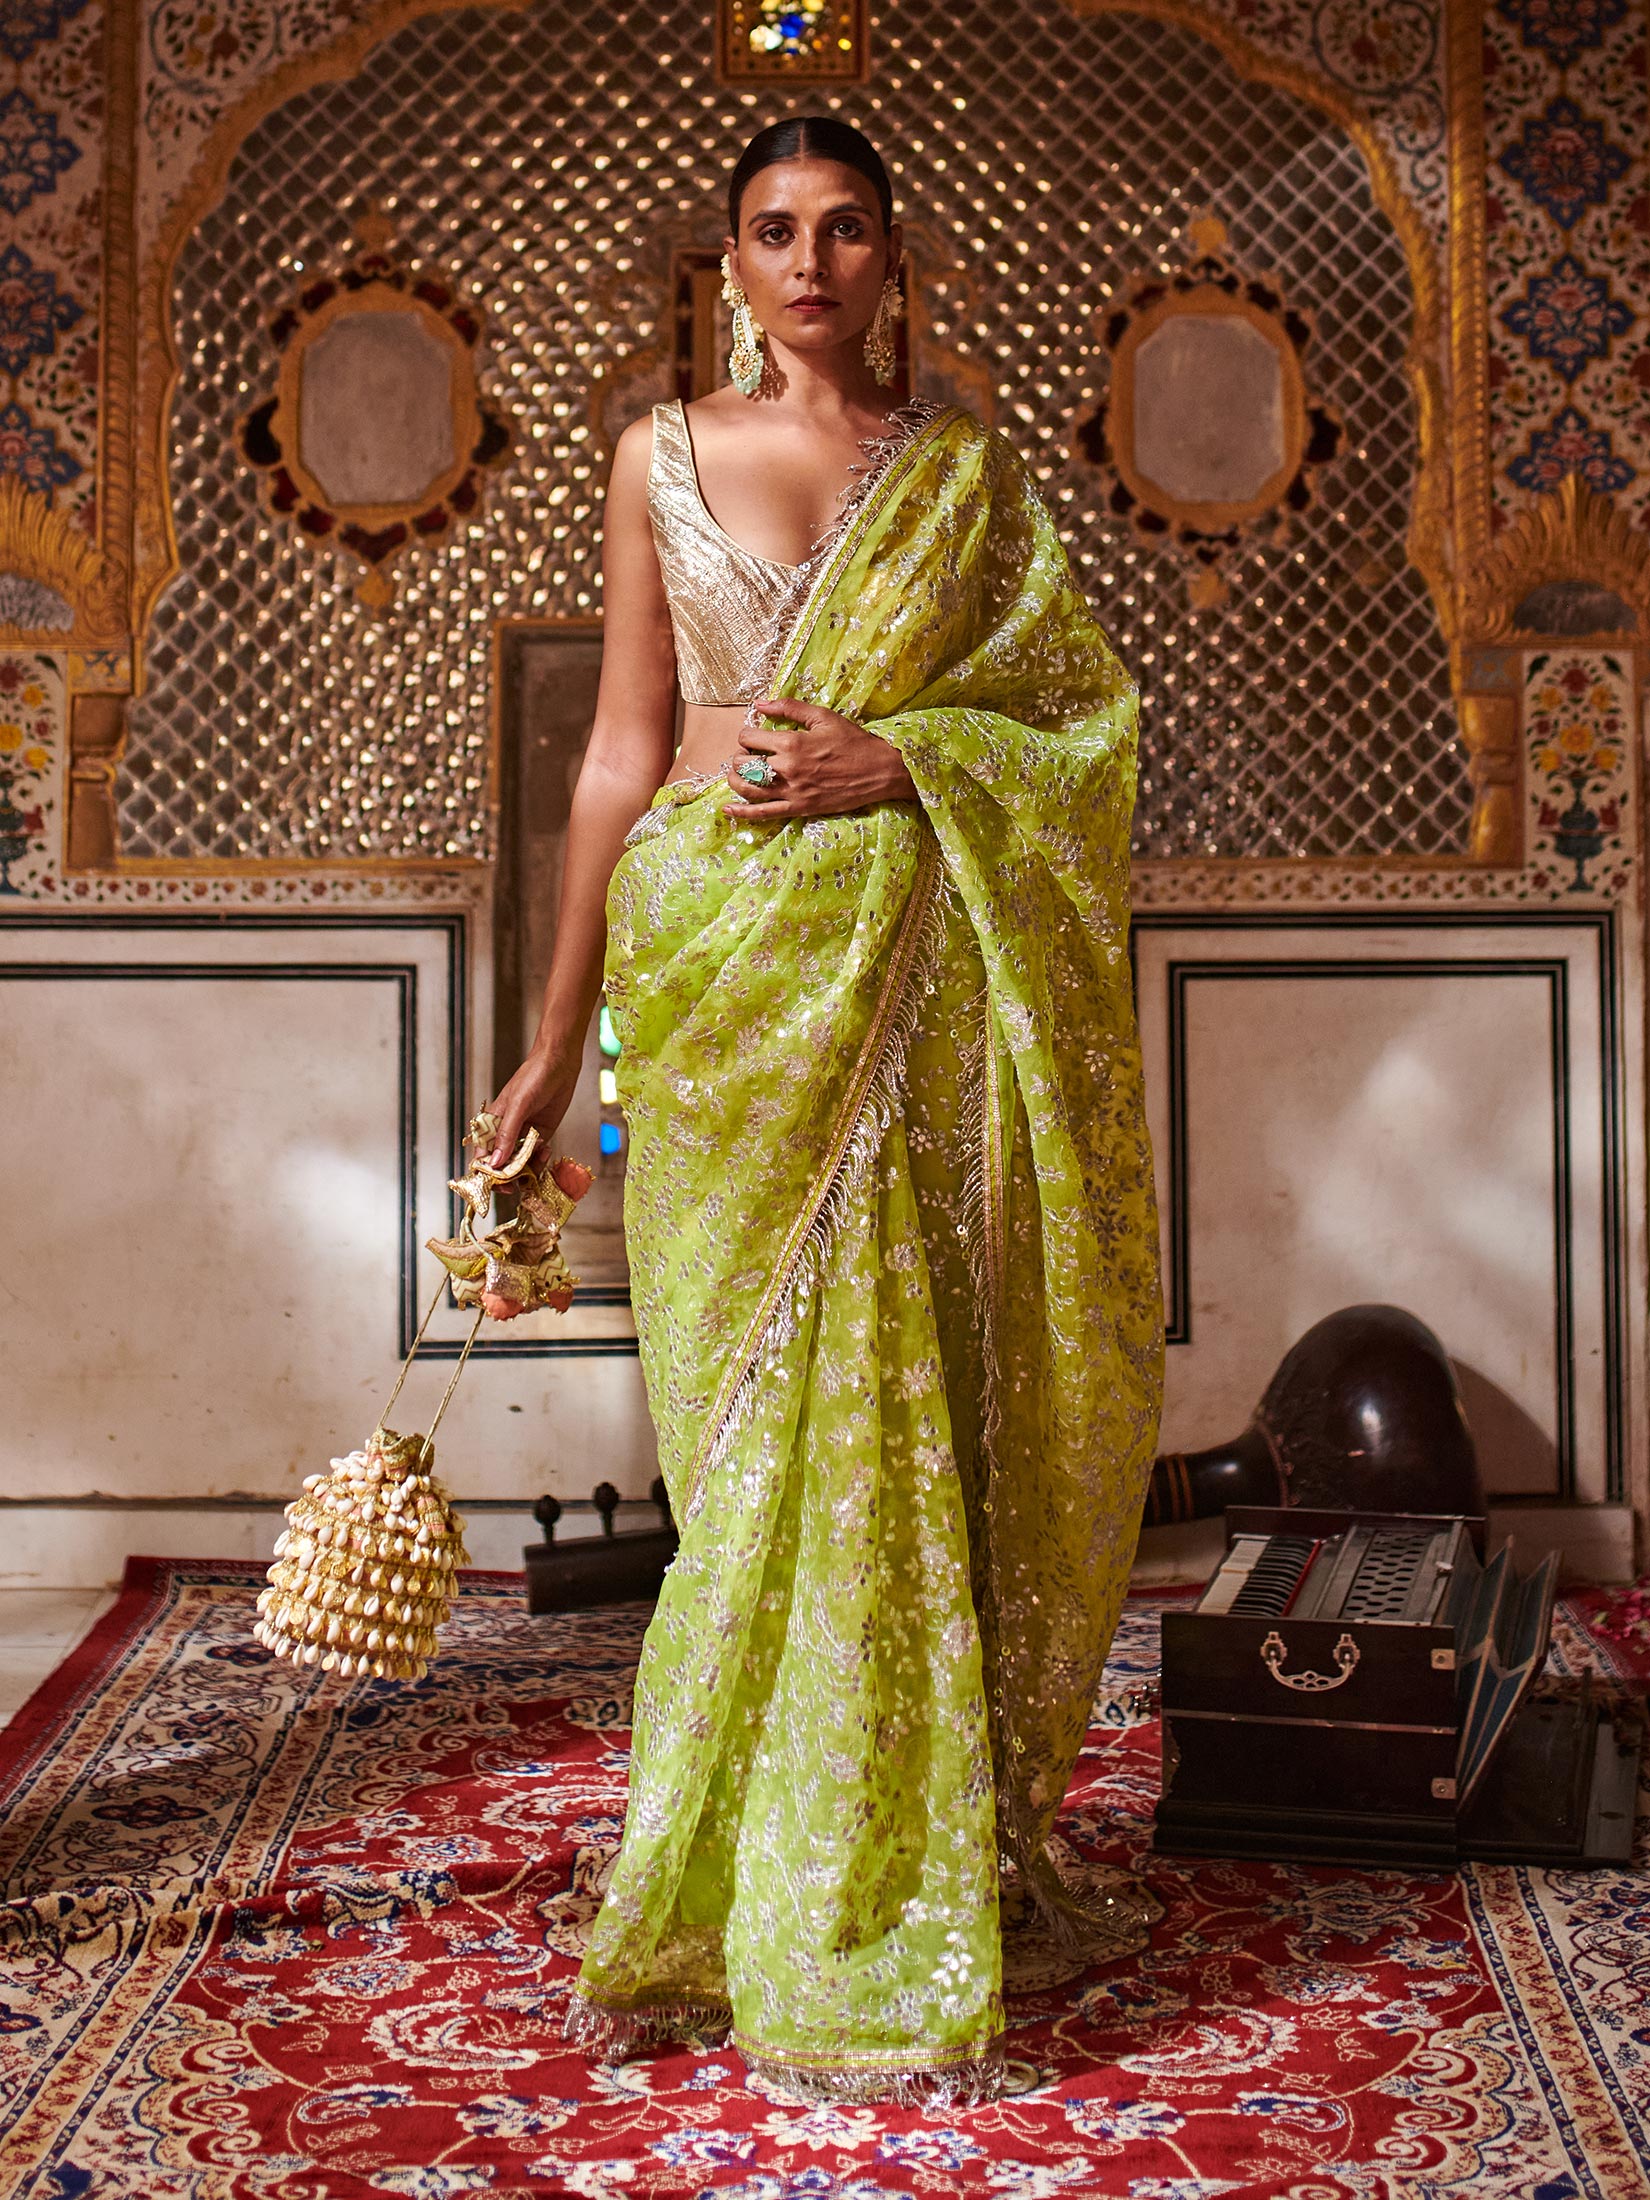 Evoluzione: Rediscovering the Timeless Beauty of Traditional Sarees